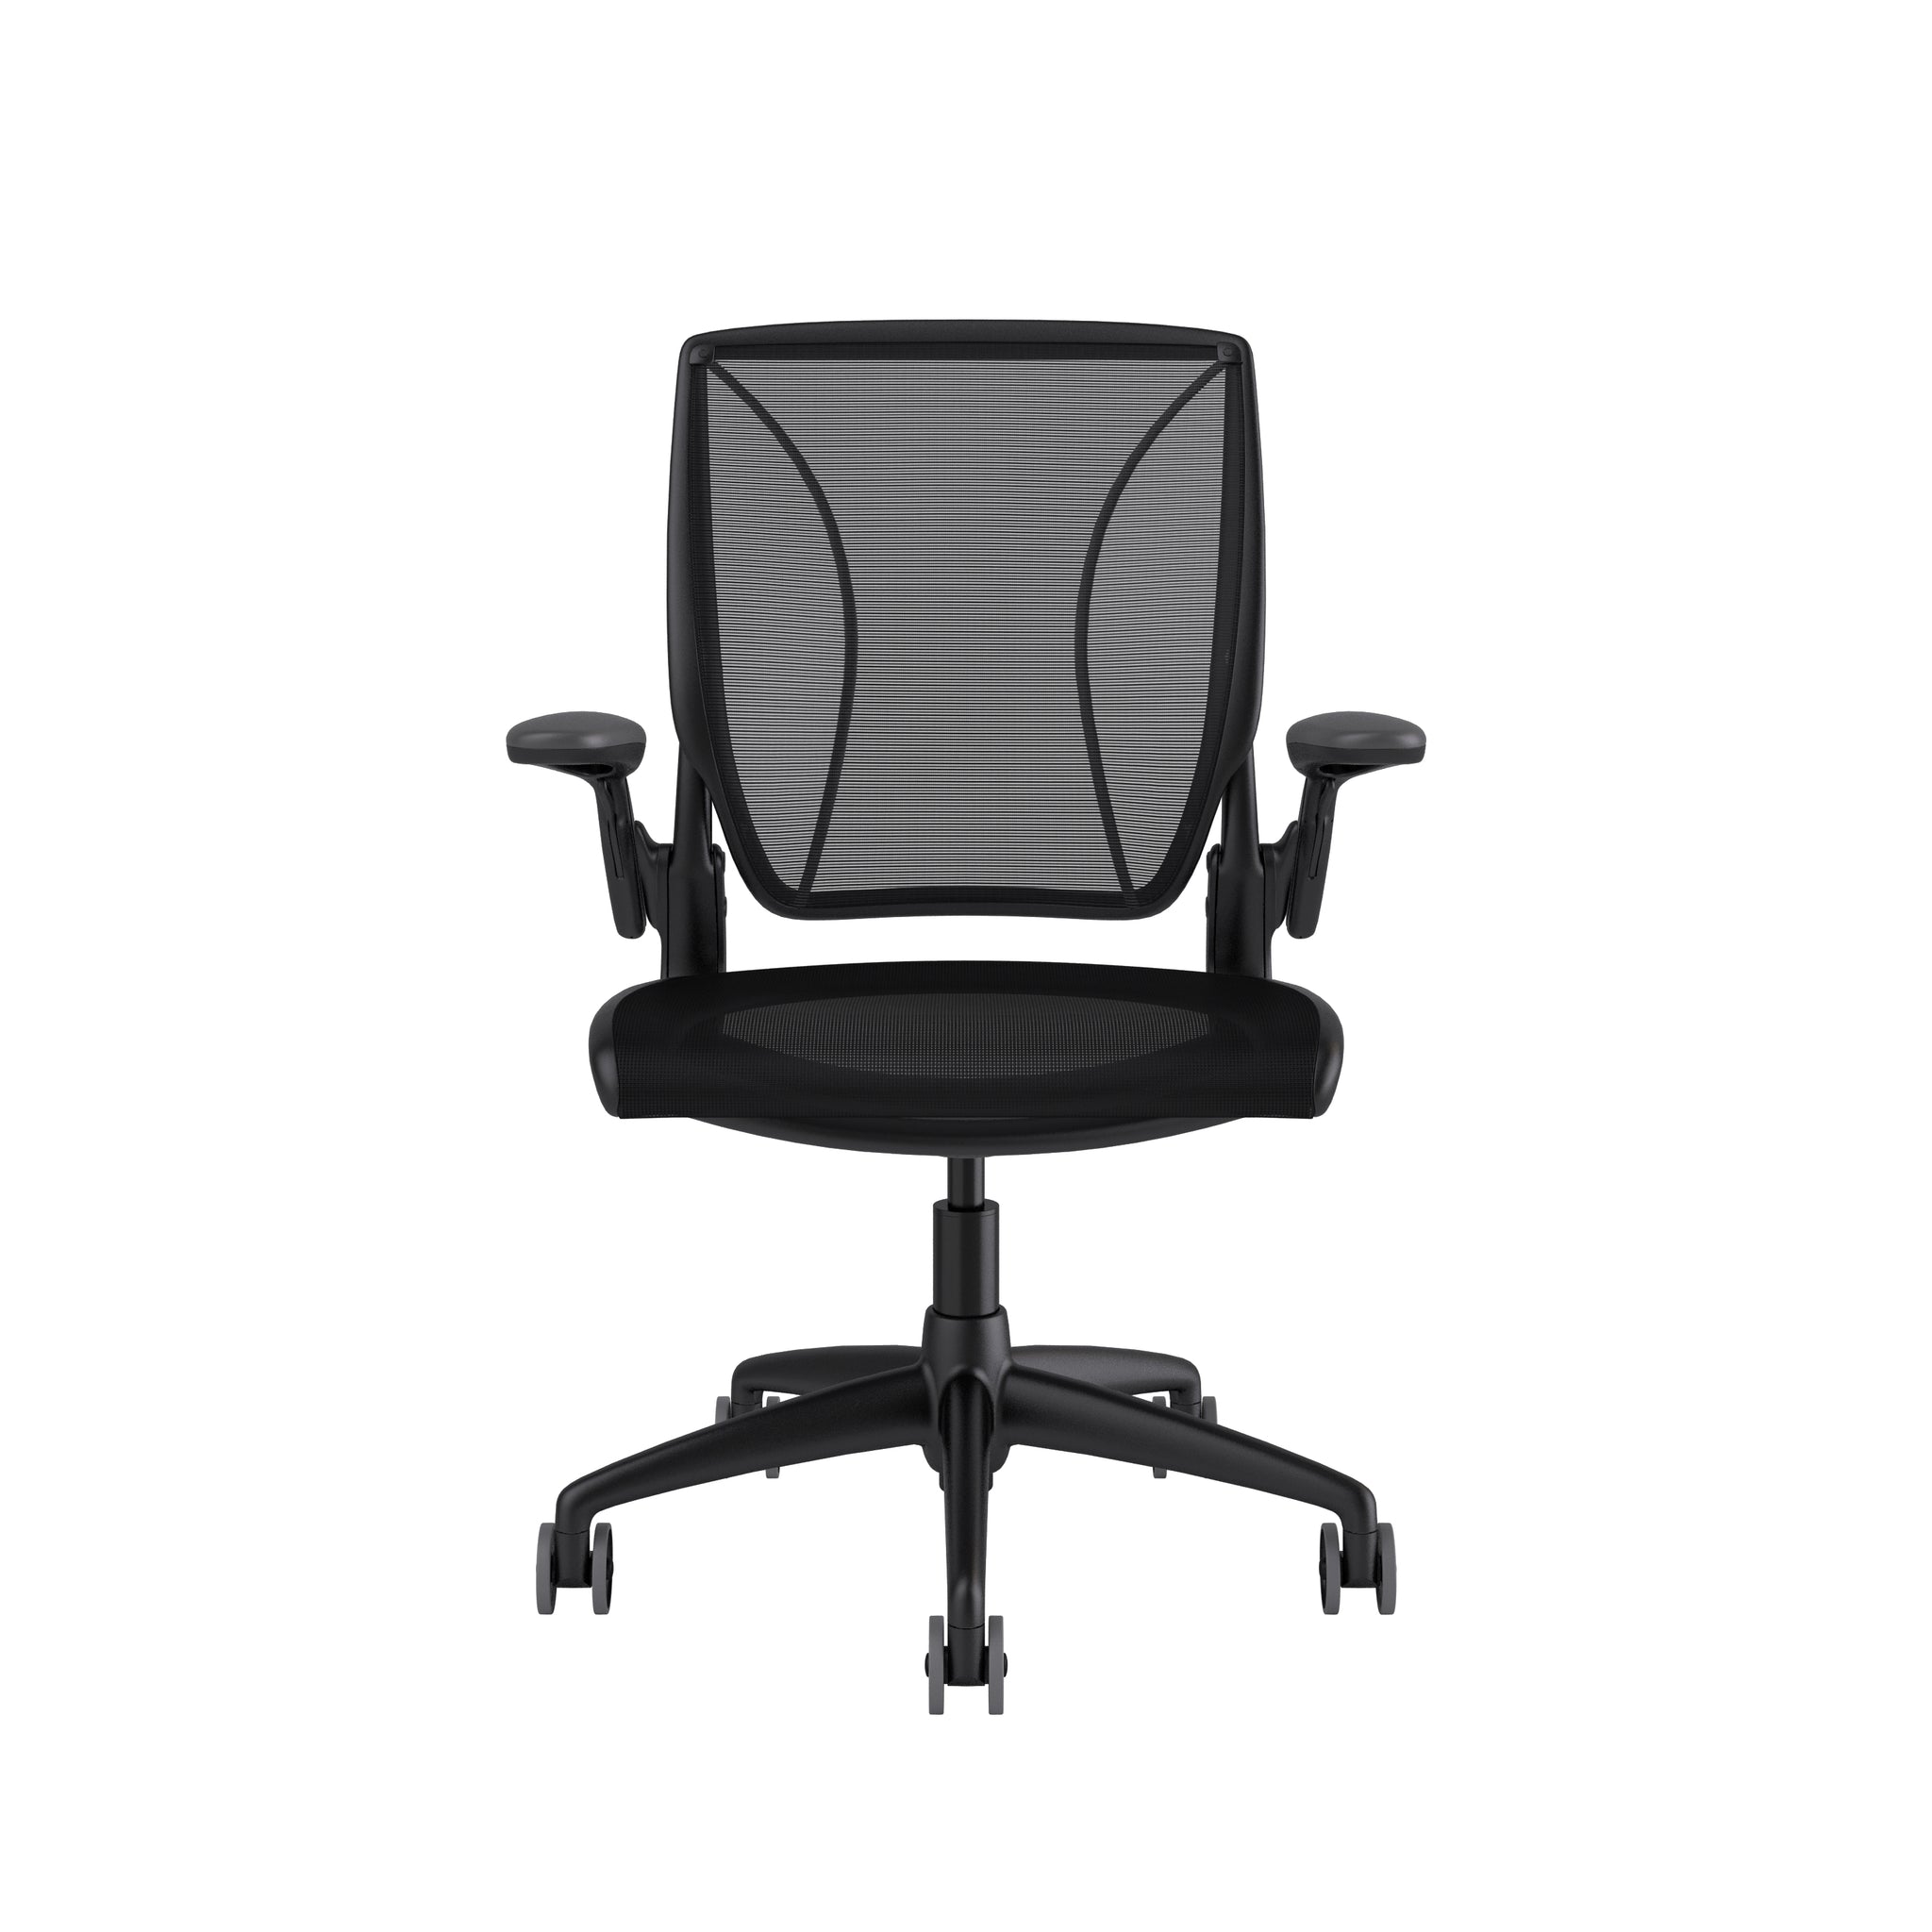 World One Chair, by Humanscale